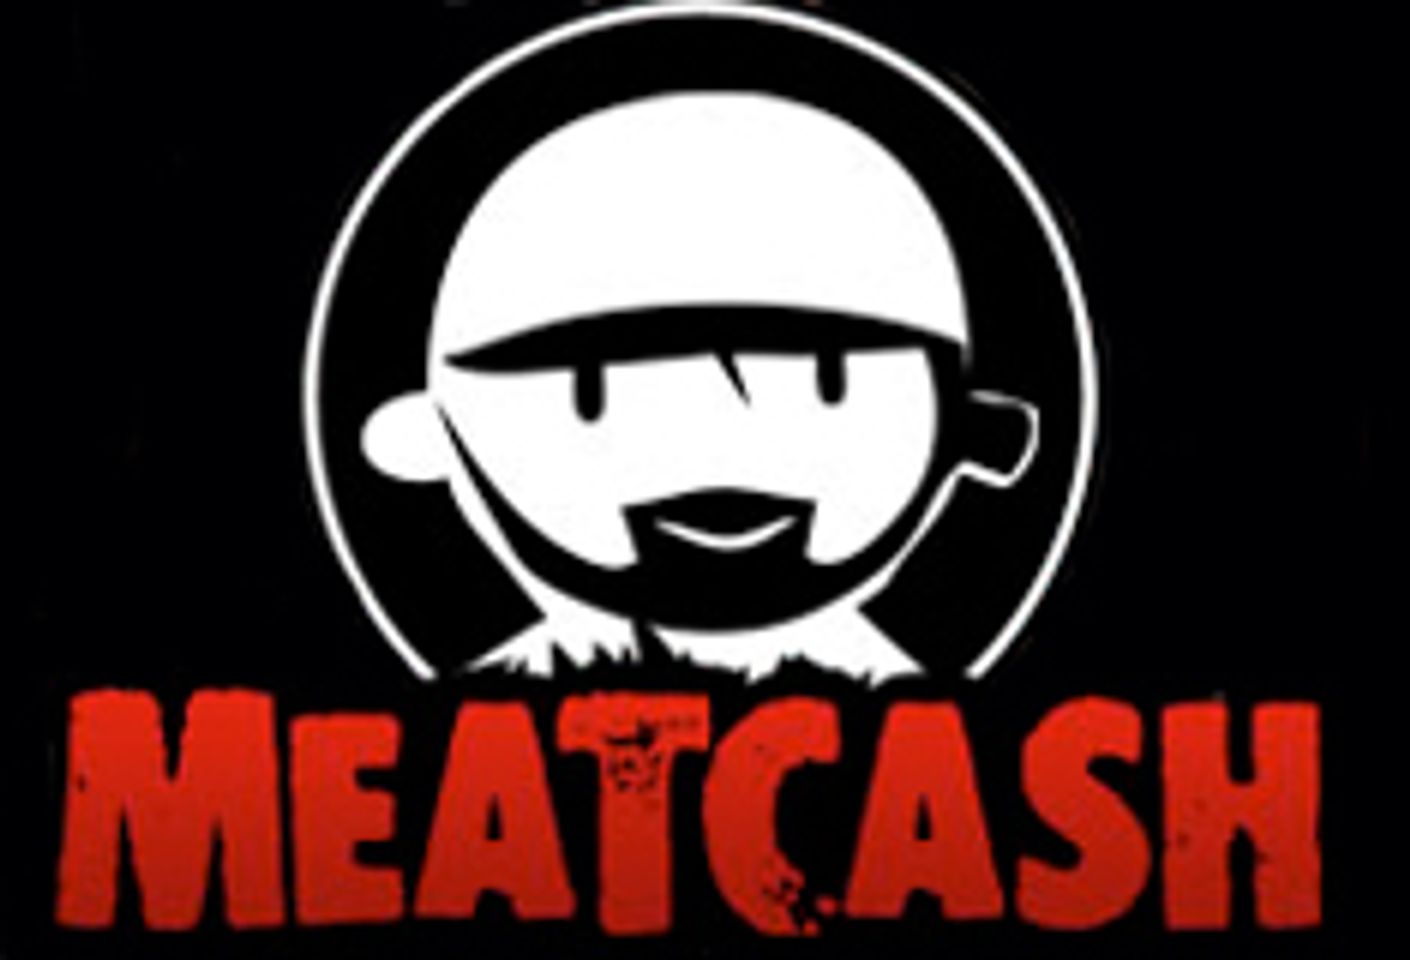 Meatcash Offers Promo a Day for 2 Months